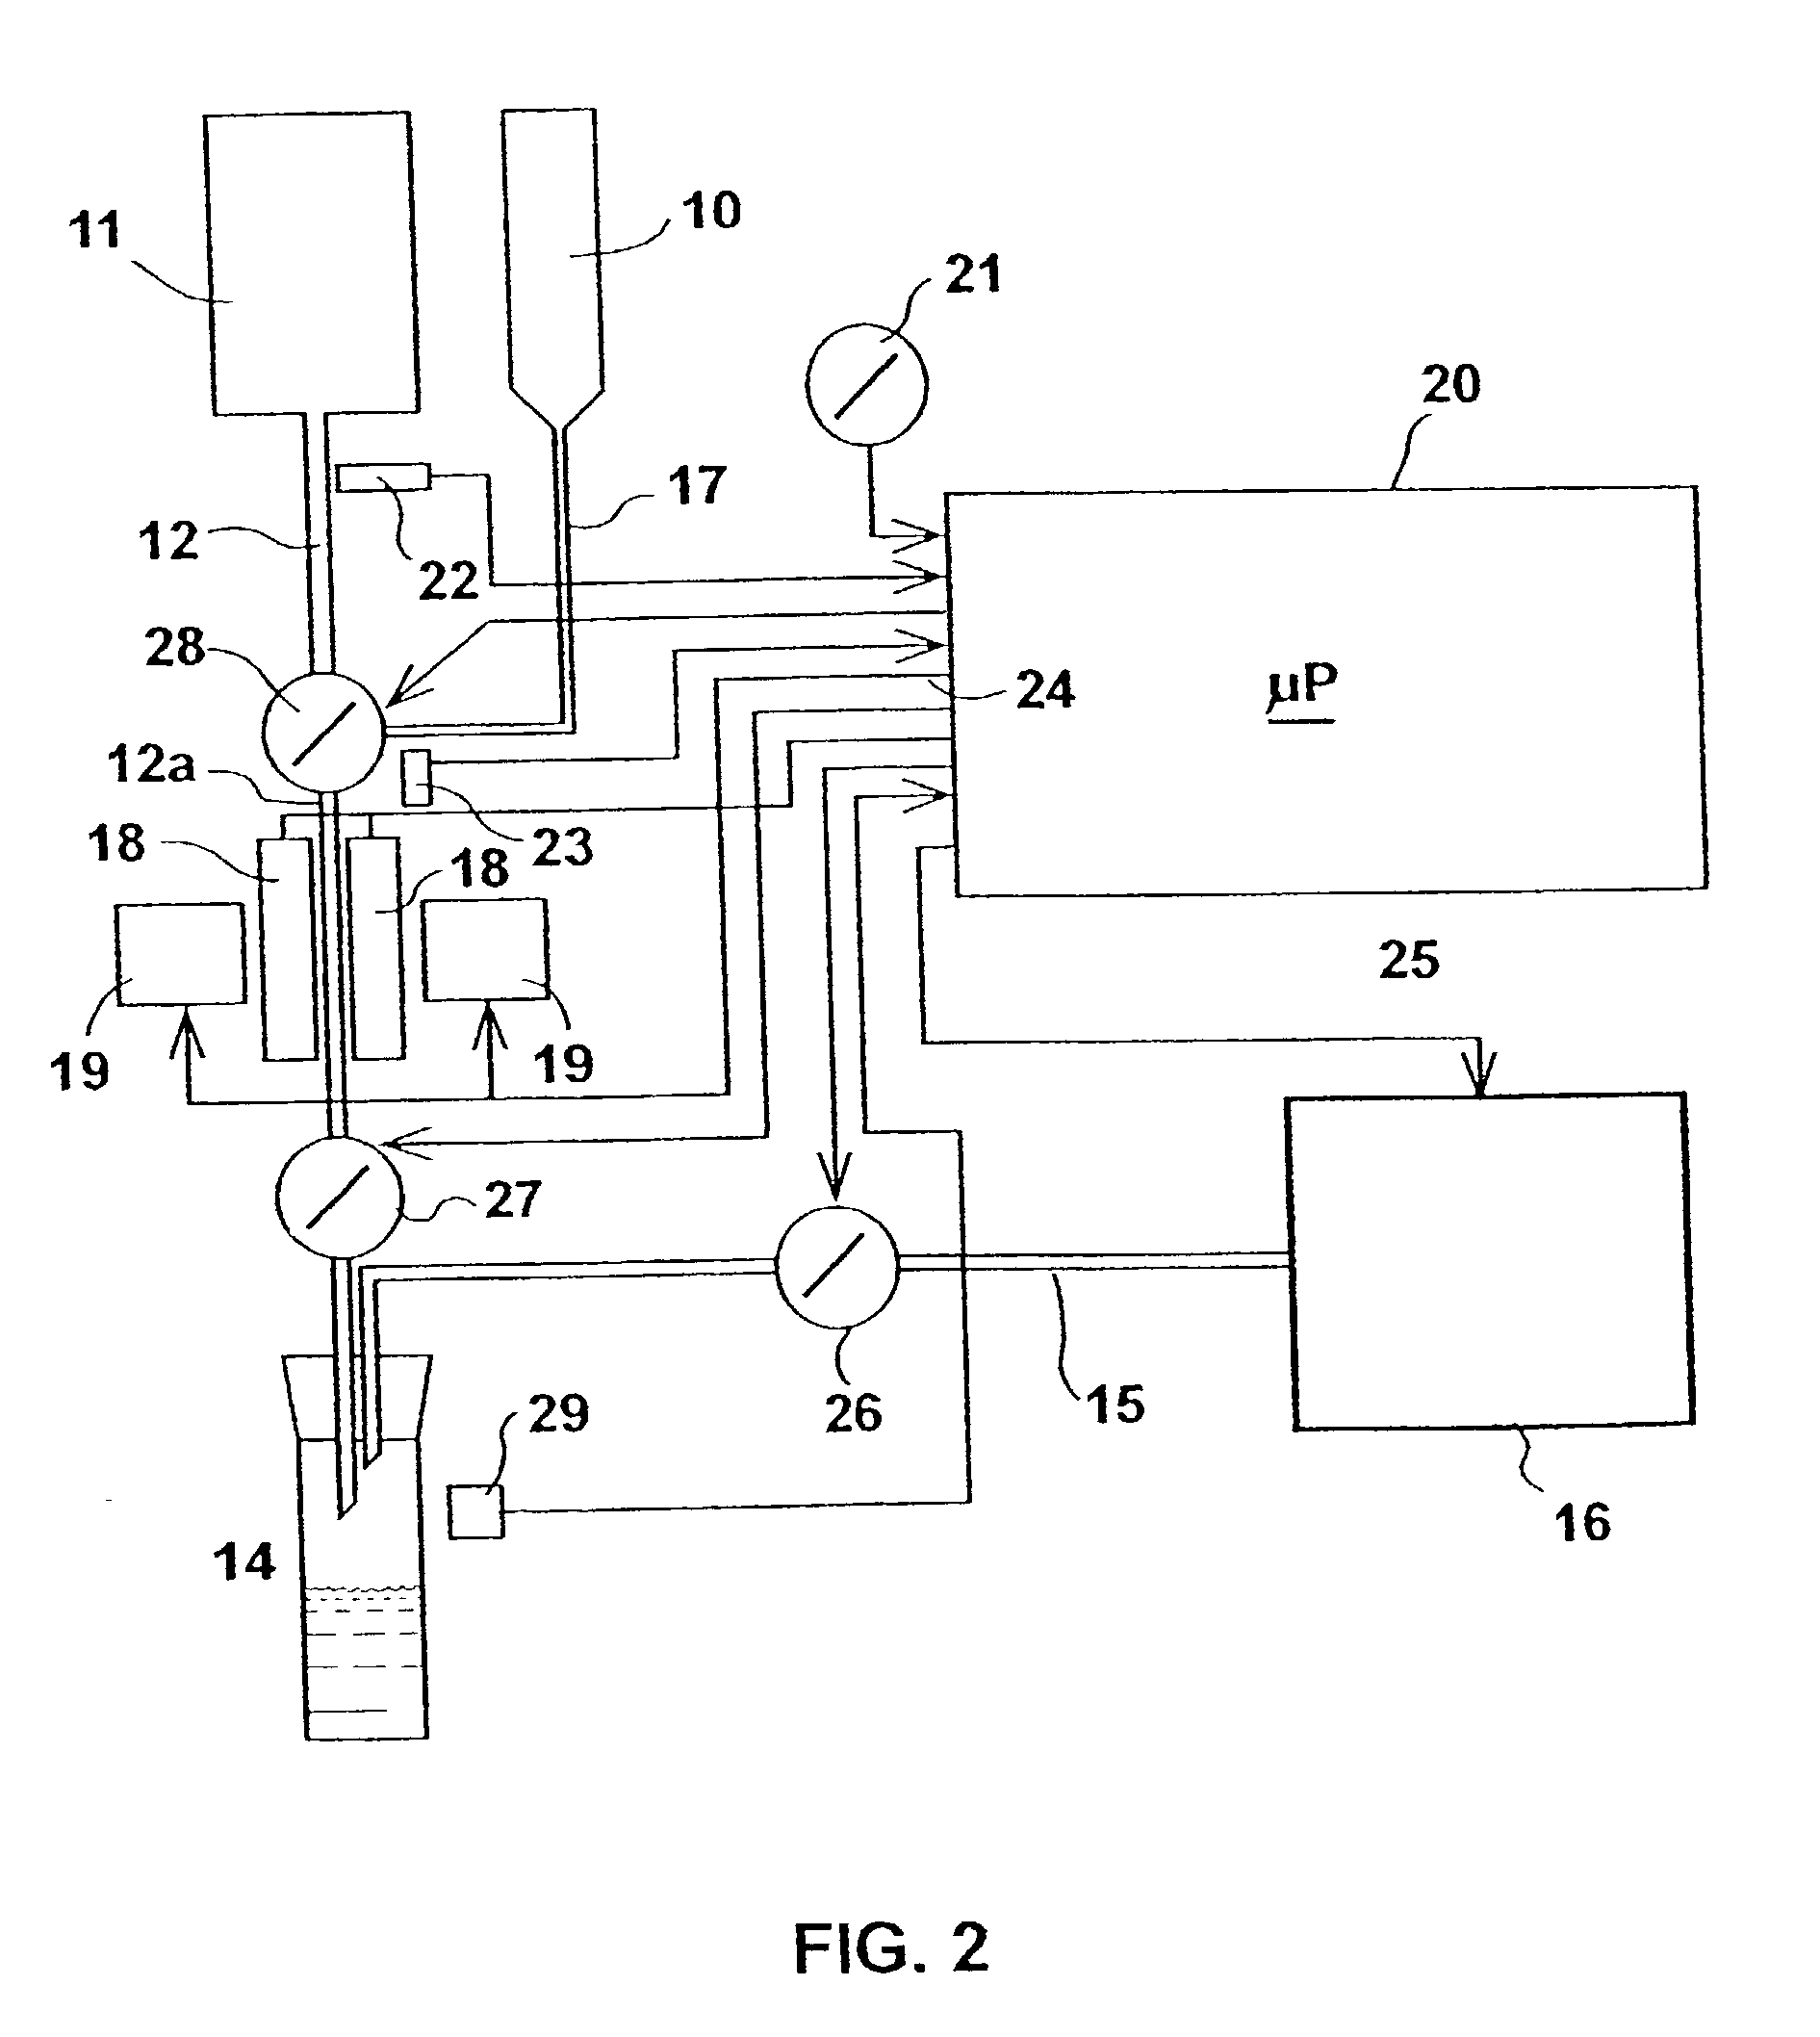 Method and apparatus for magnetically separating selected particles, particularly biological cells